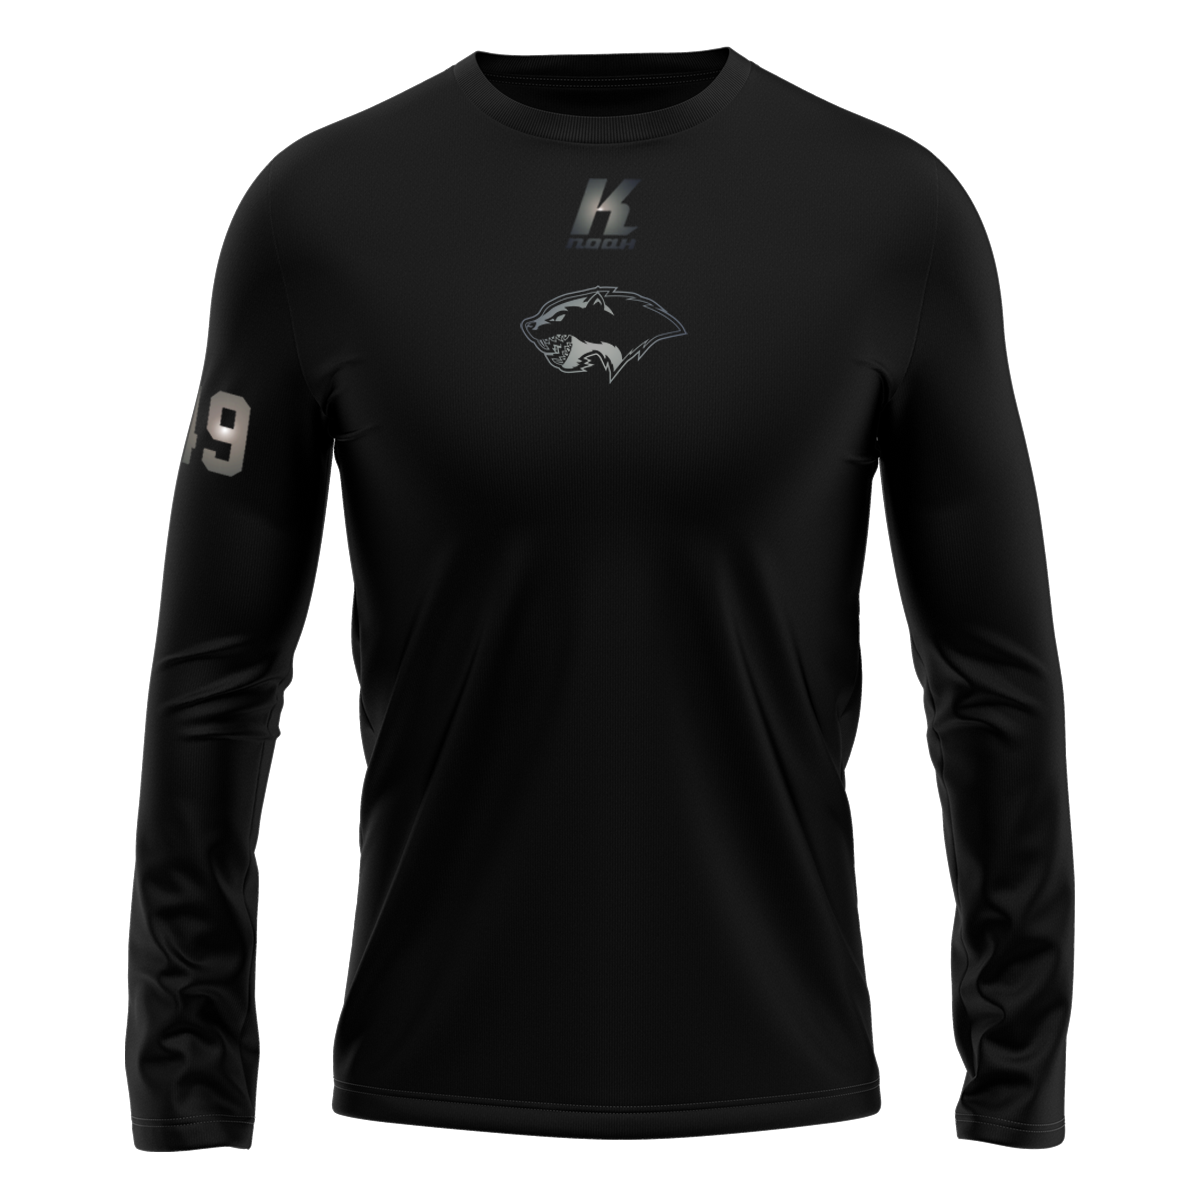 Wolverines "Blackline" K.Tech Longsleeve Tee L02071 with Playernumber/Initials